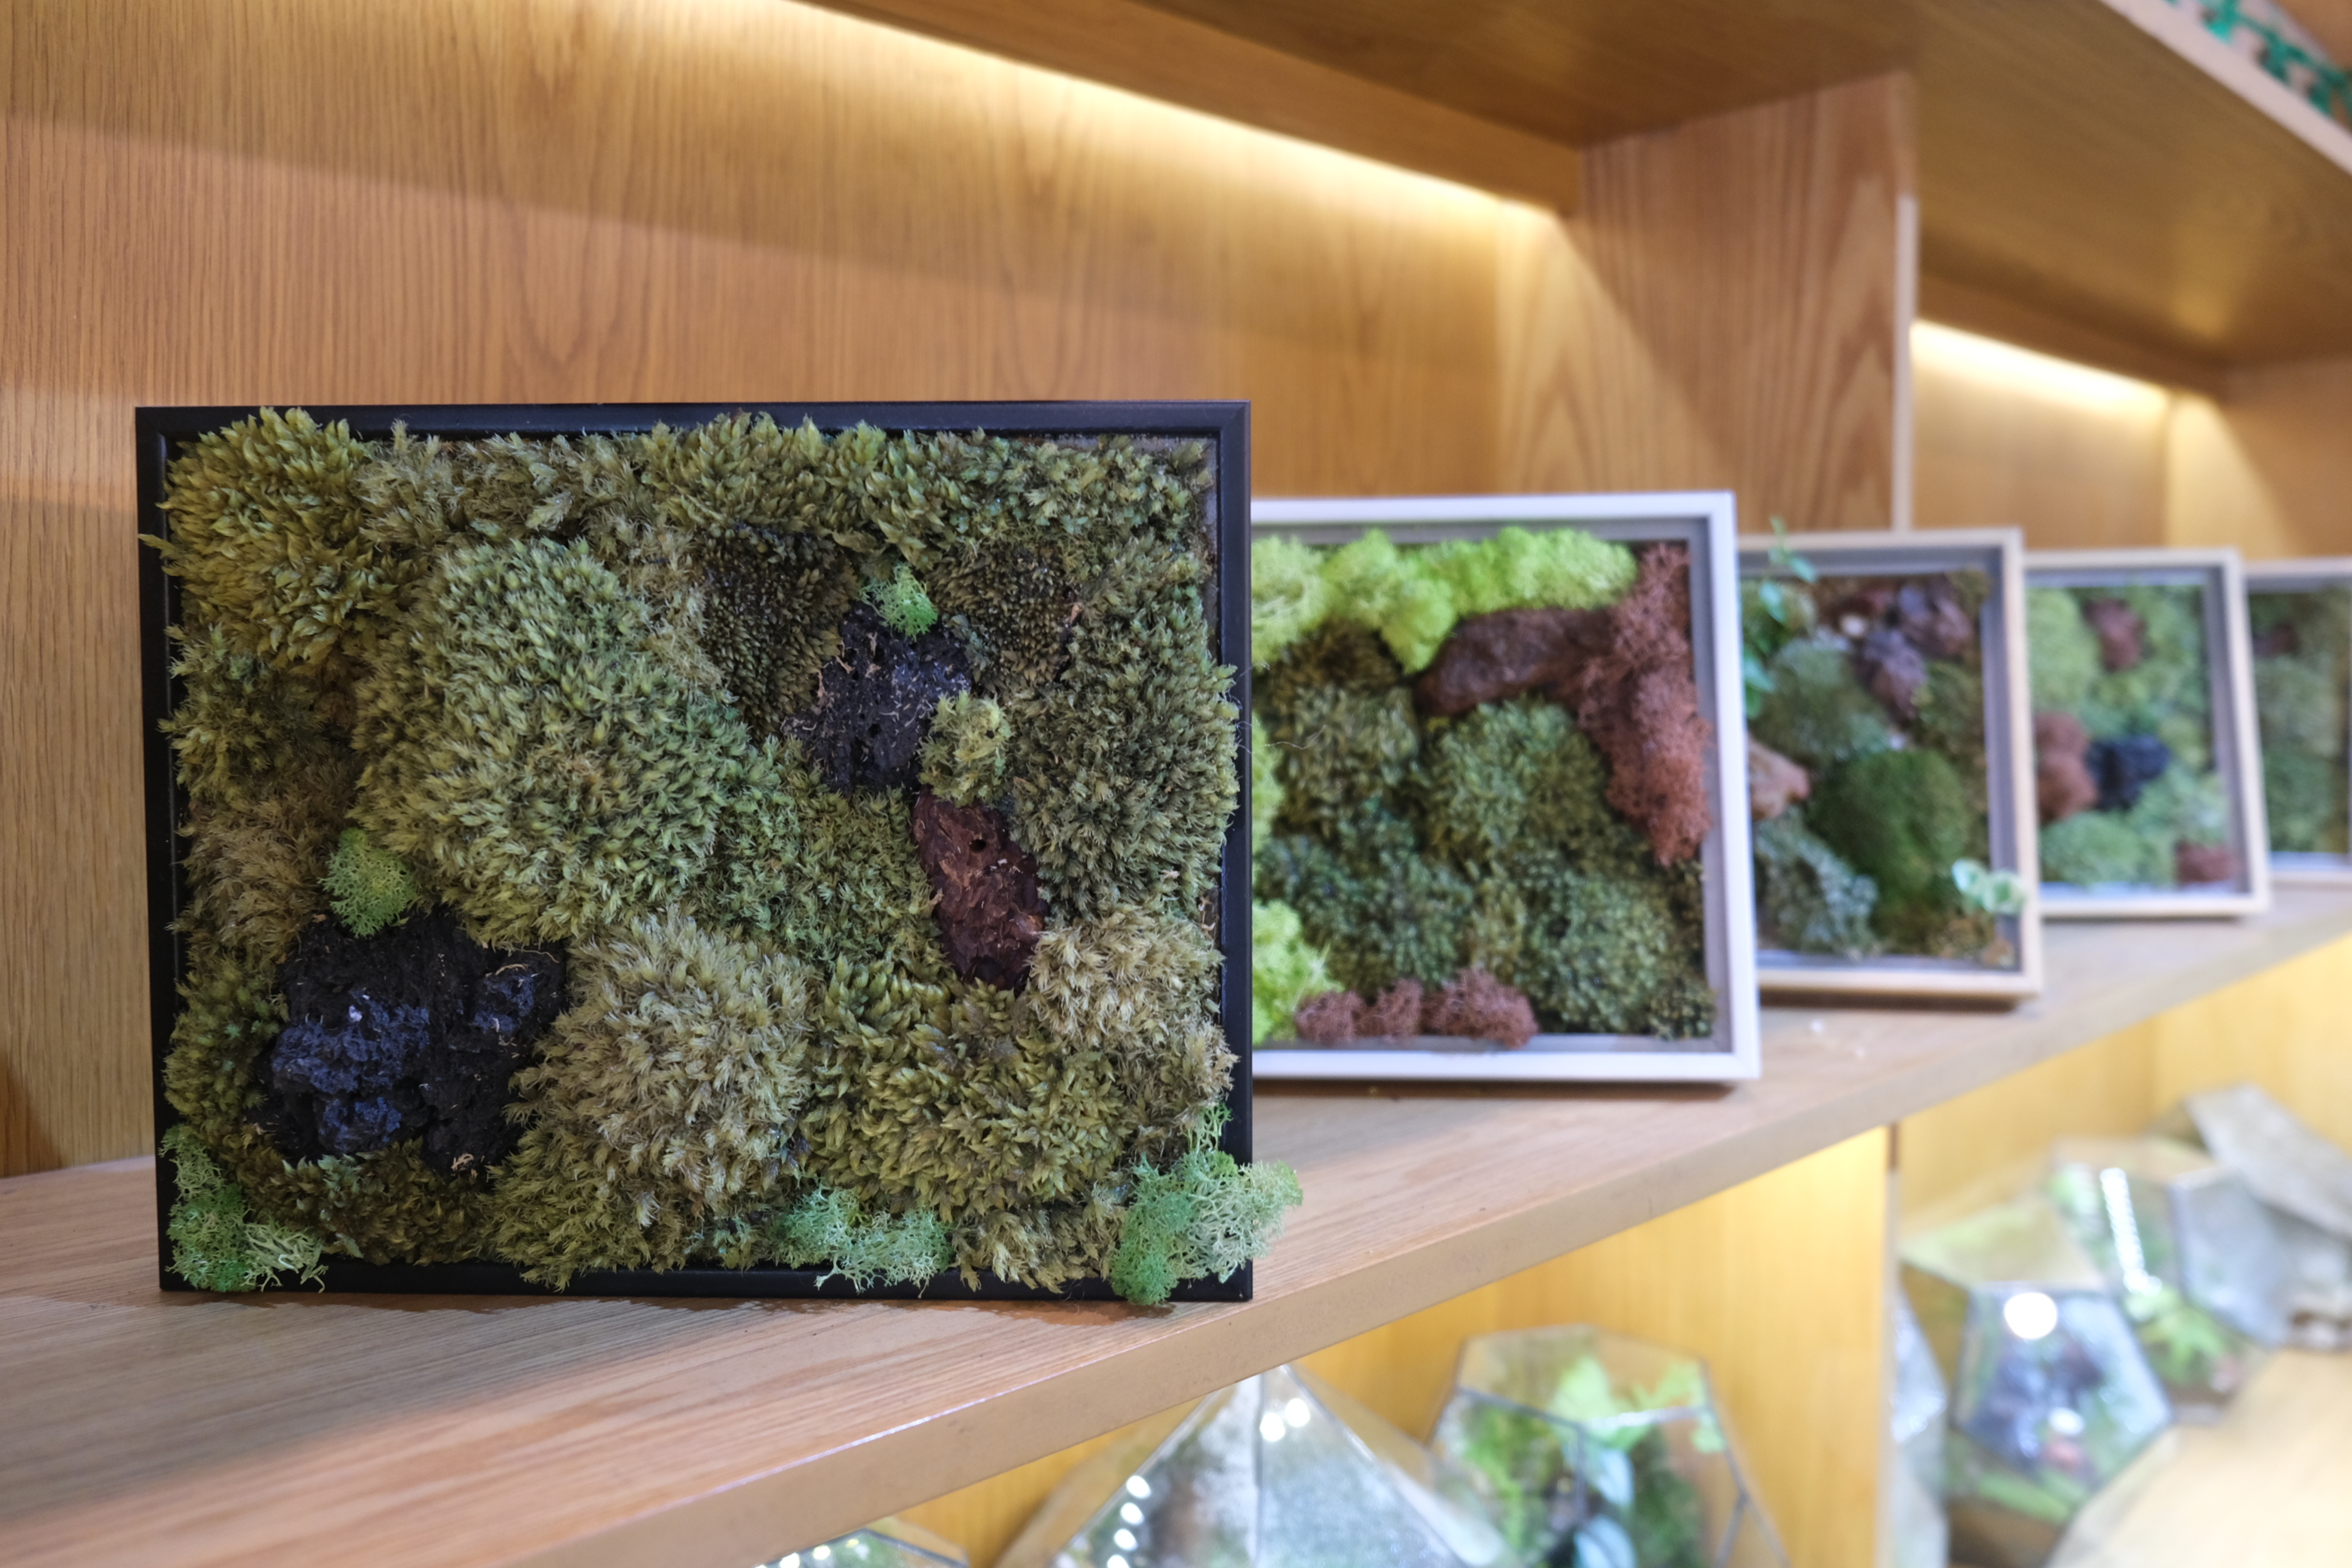 Moss pictures are displayed at Lap’s shop. Photo: Ngoc Phuong / Tuoi Tre News